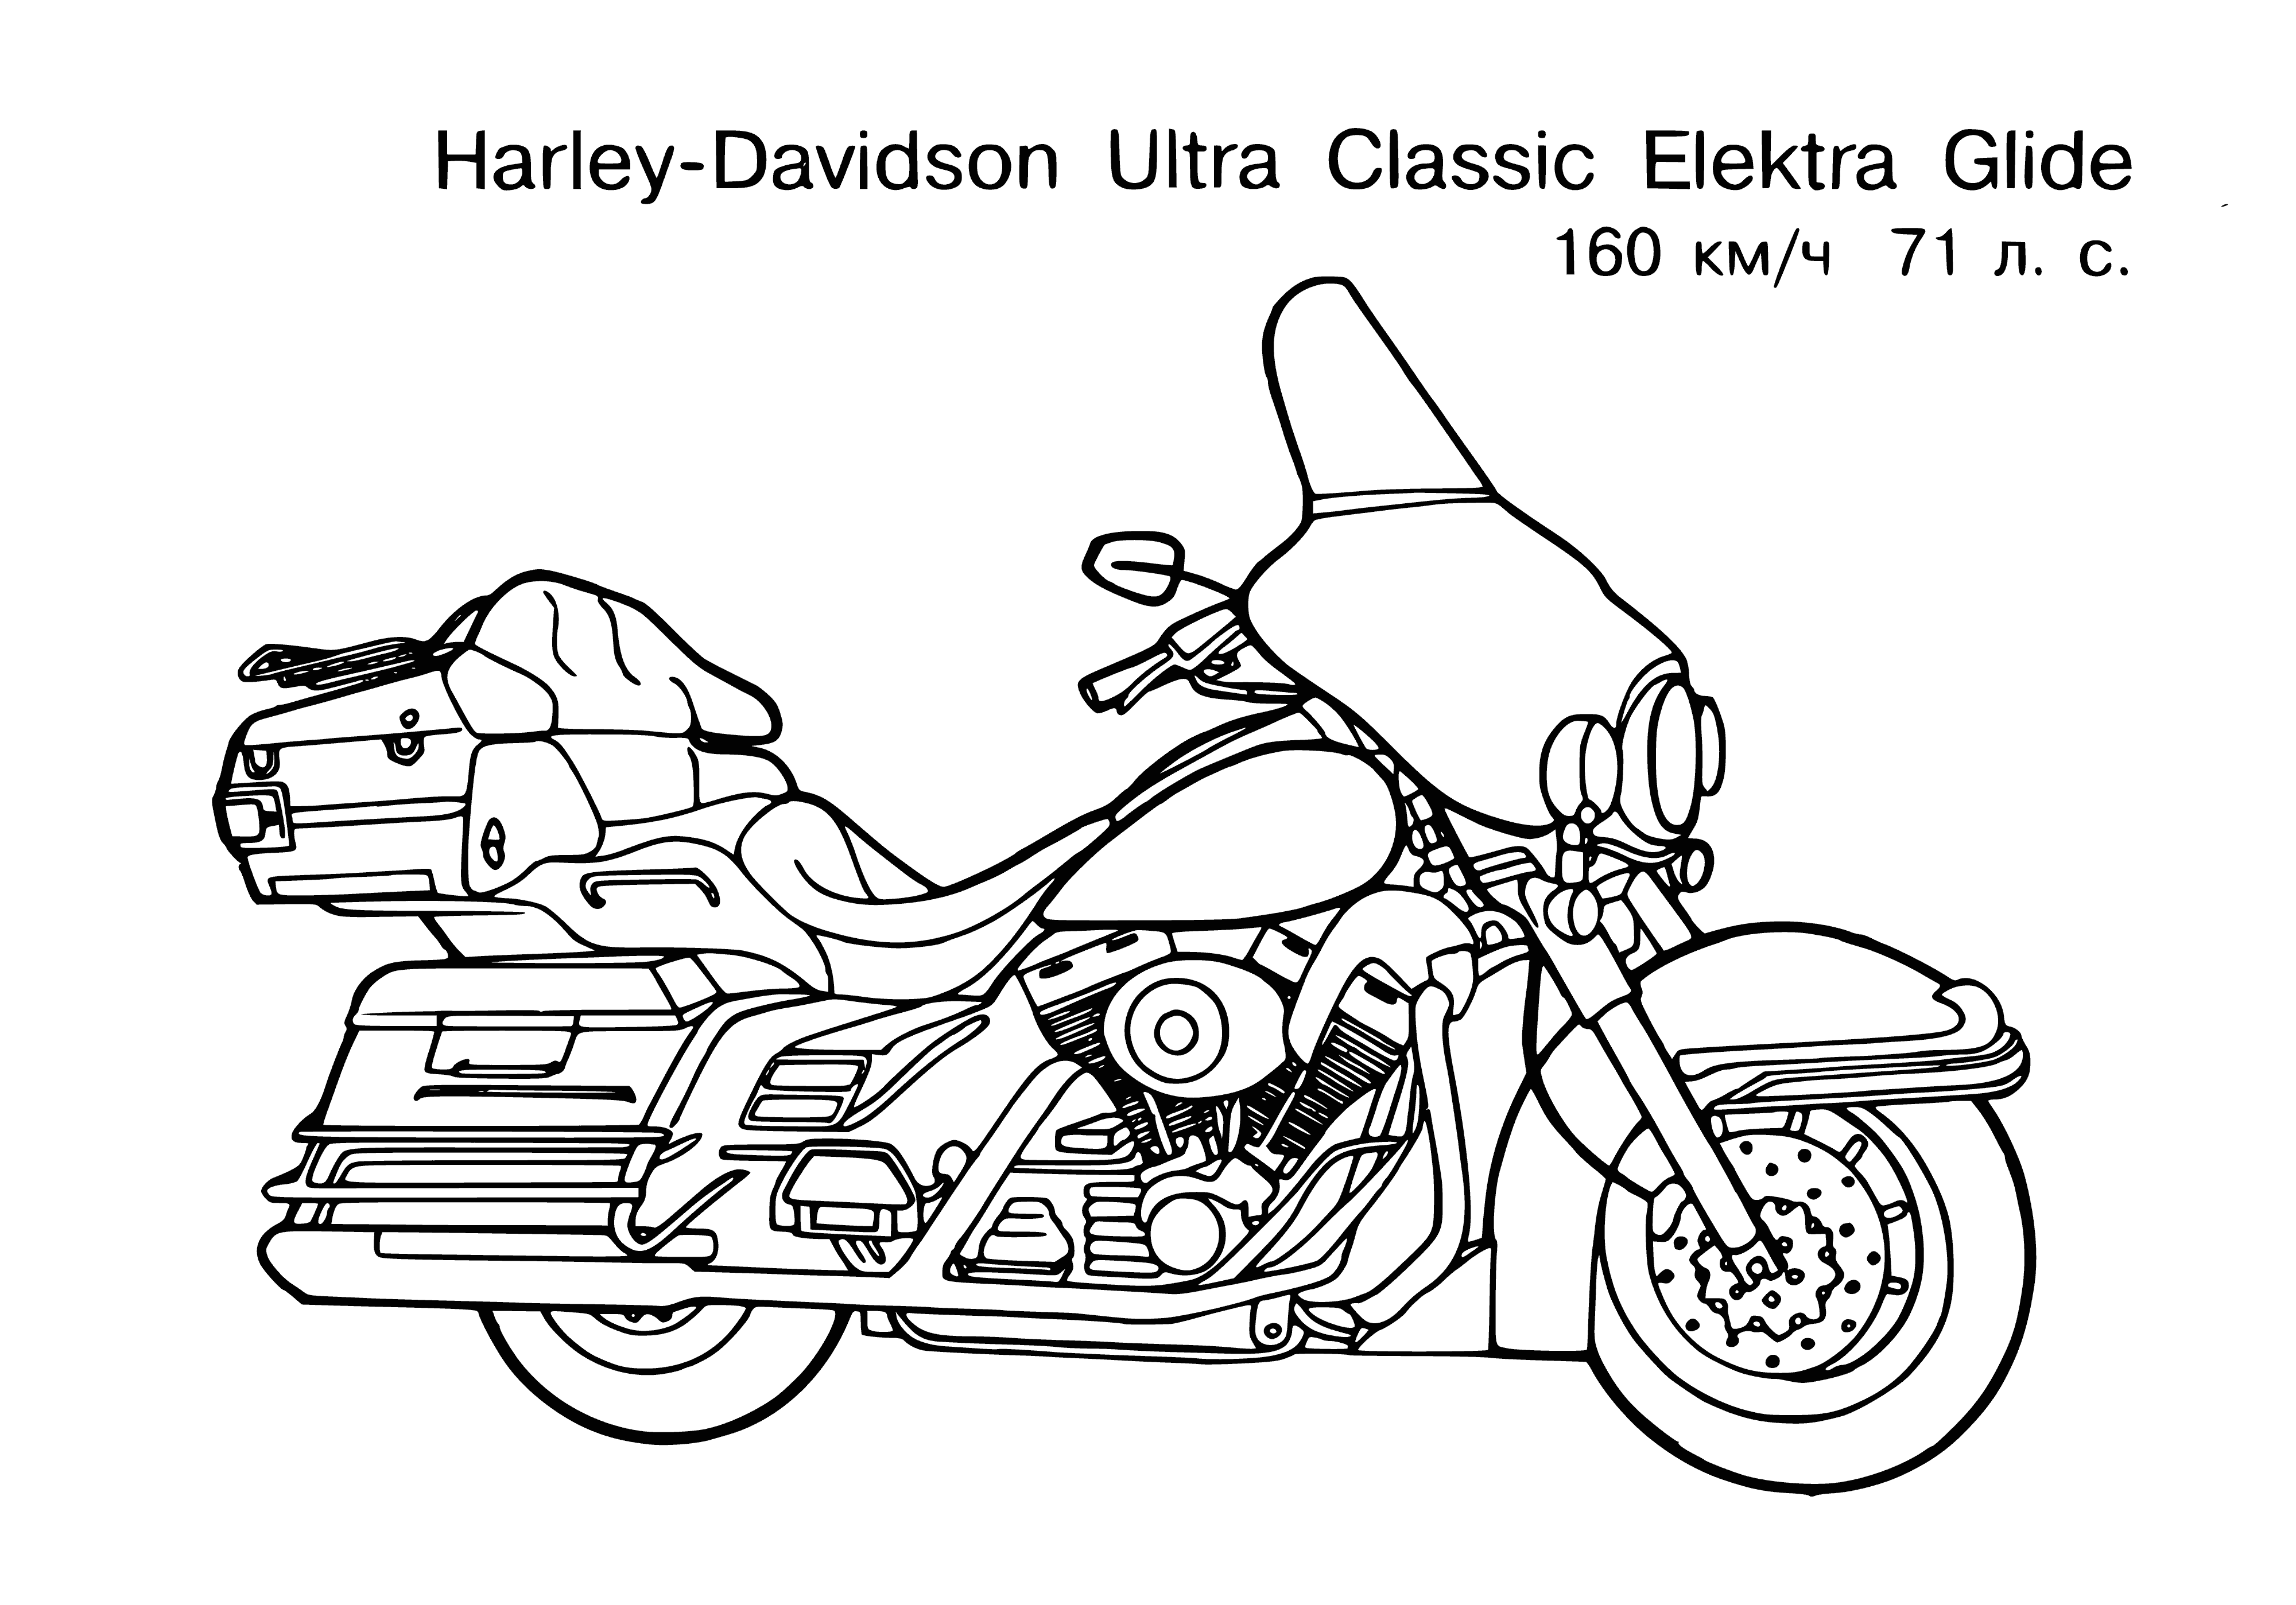 coloring page: Two motorcycles, one rider, kickstands down, engines running, headlight on. #ColoringPage